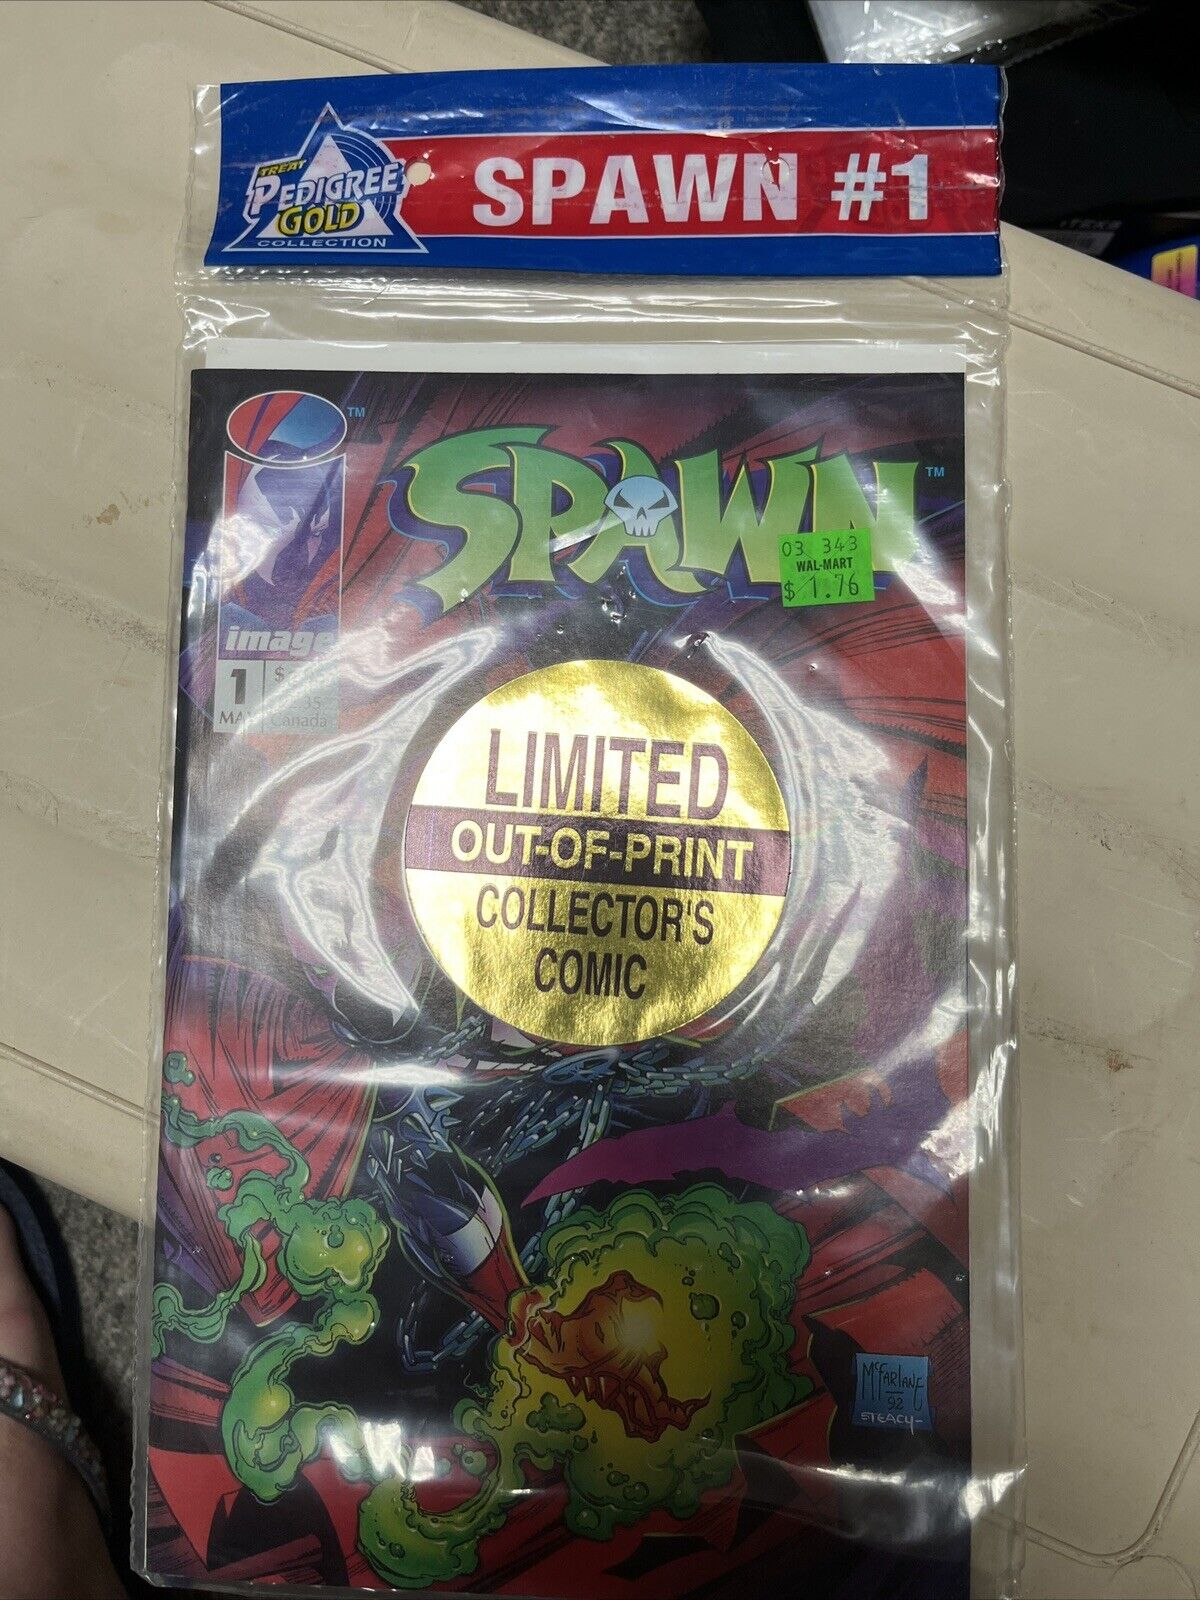 Spawn #1 Pedigree Gold Polybag Sealed Limited Out Of Print Collector’s Comic